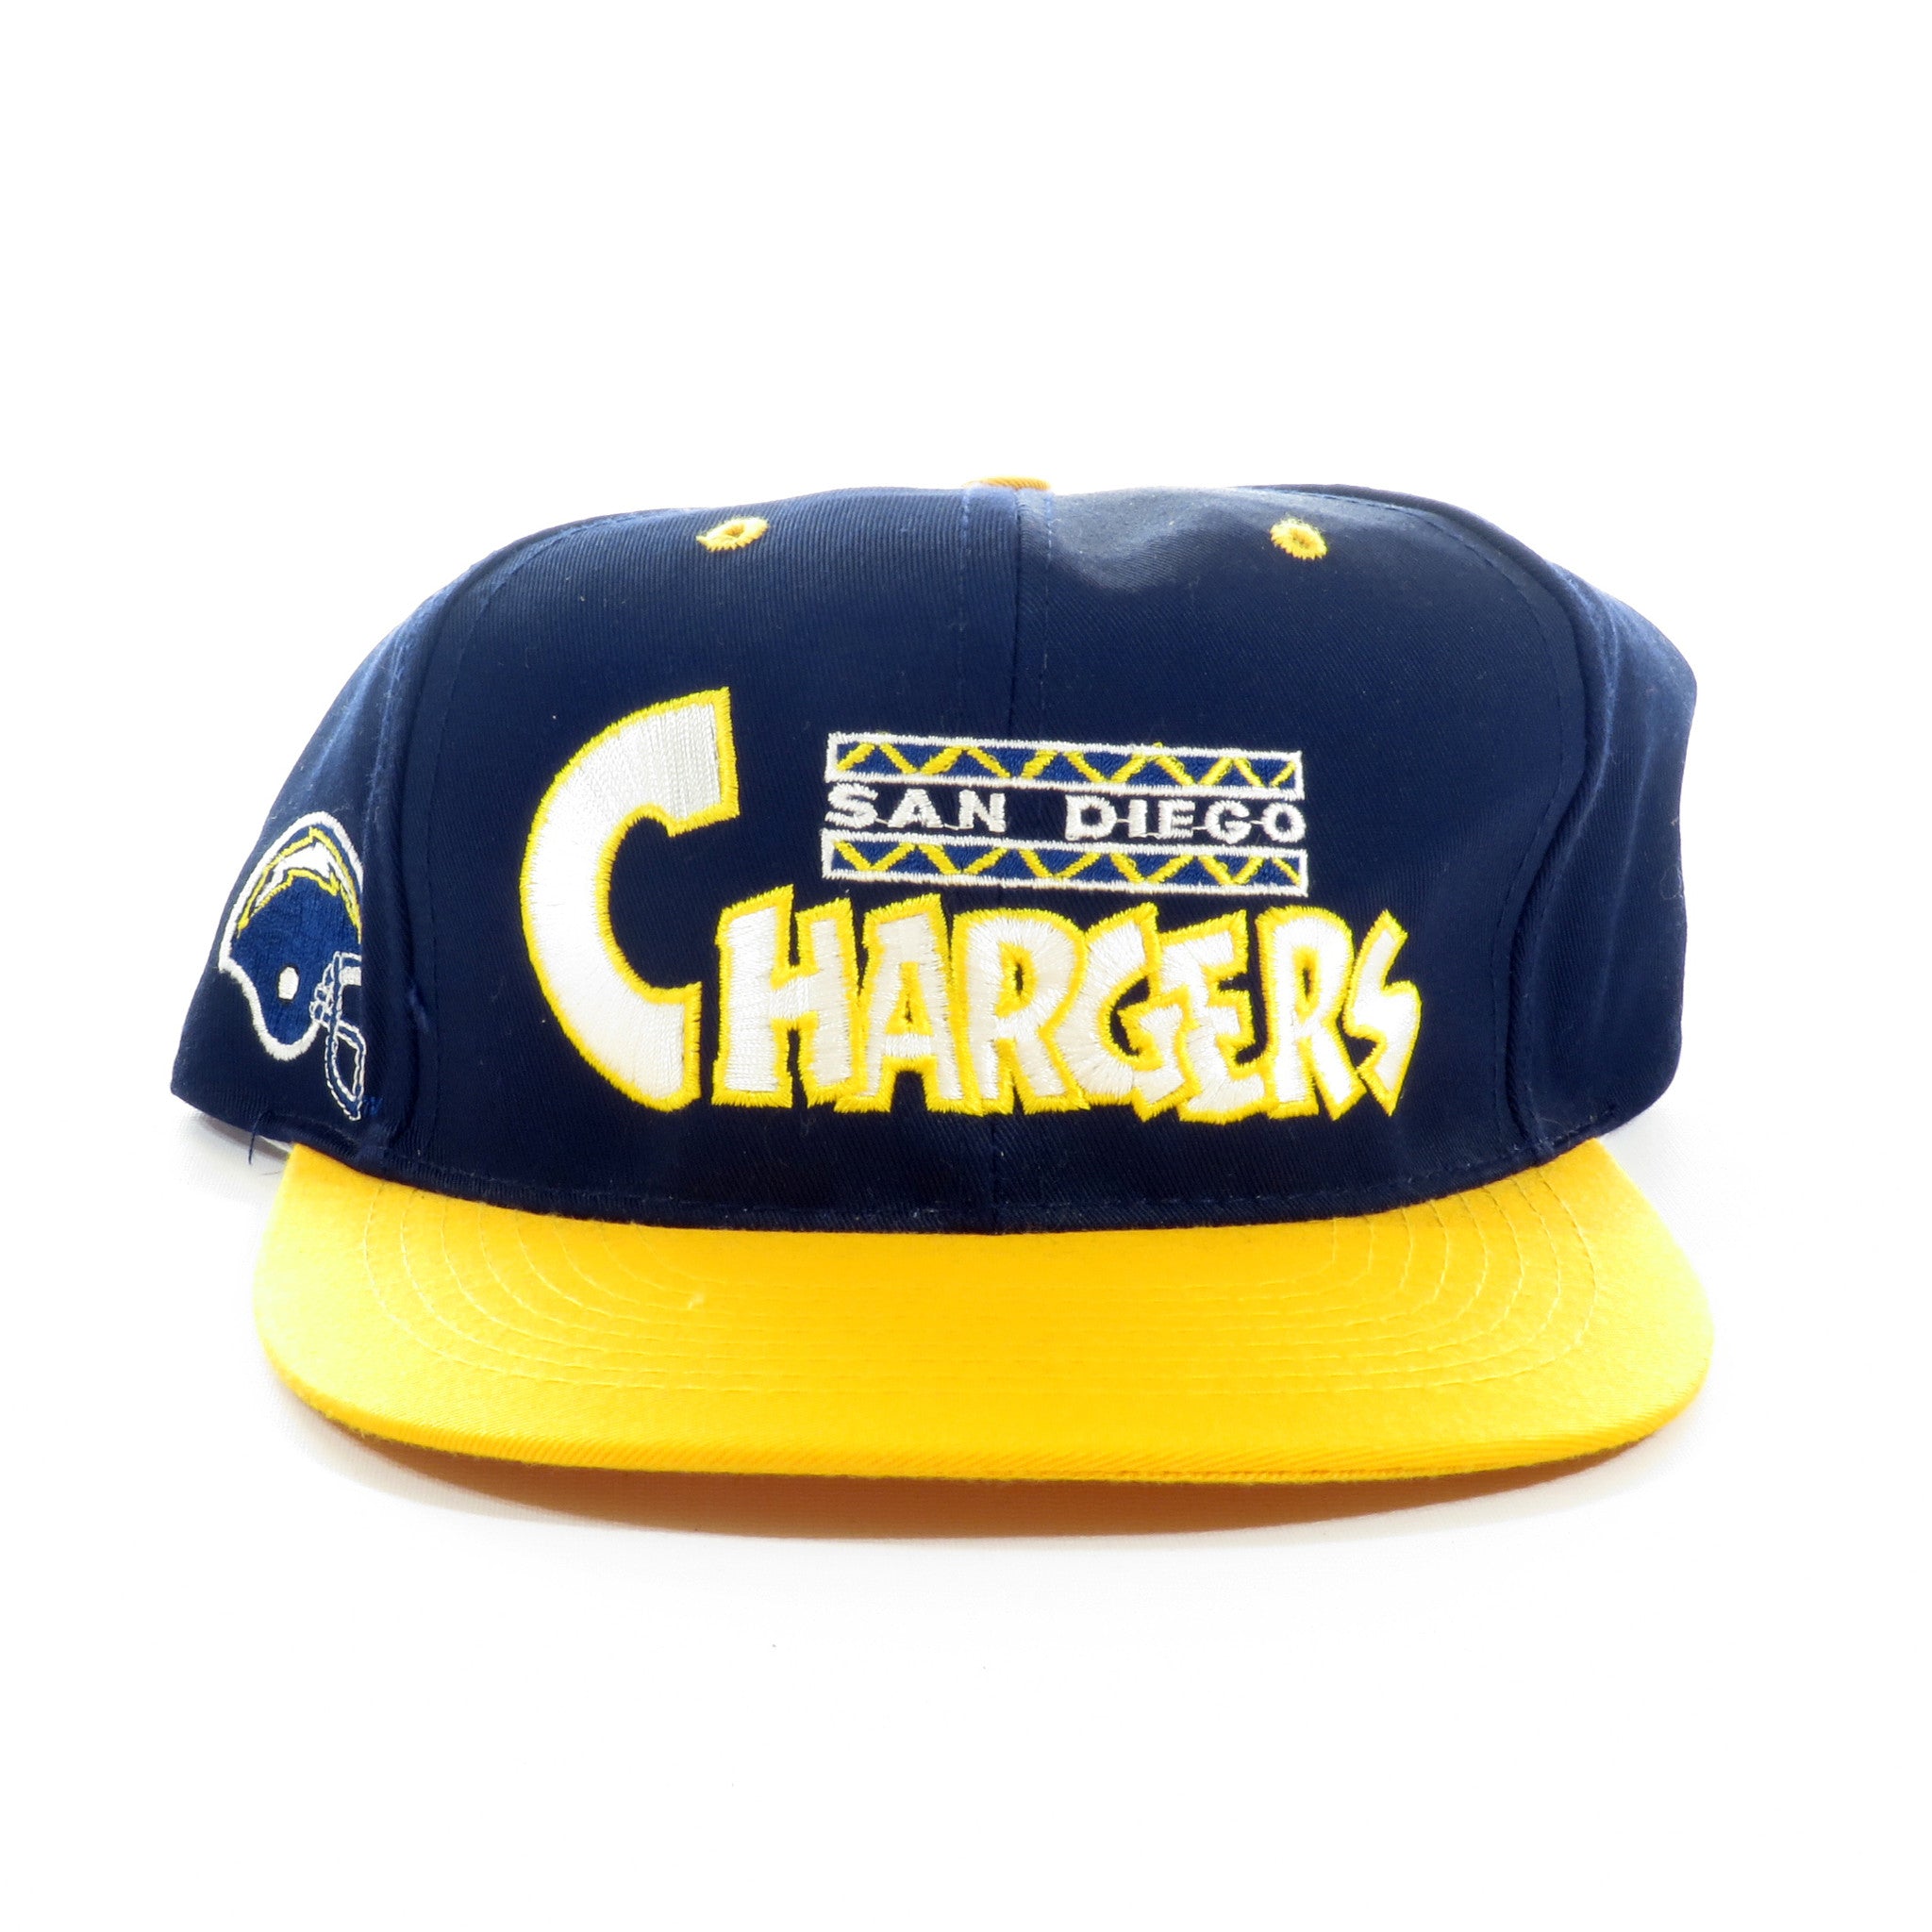 San Diego Chargers Snapback Hat